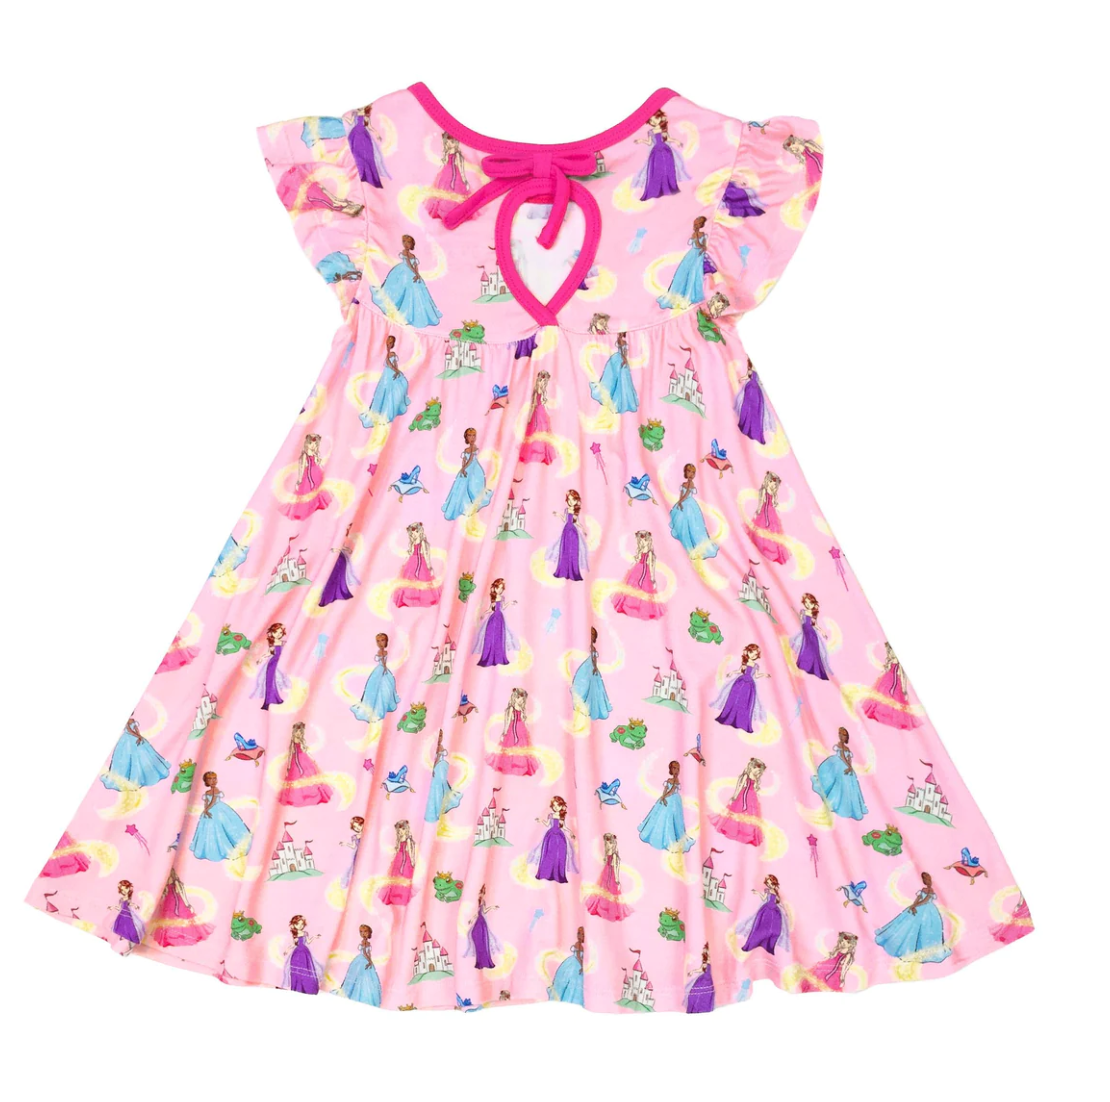 MAKE YOUR OWN MAGIC PRINCESSES TWIRLING DRESS